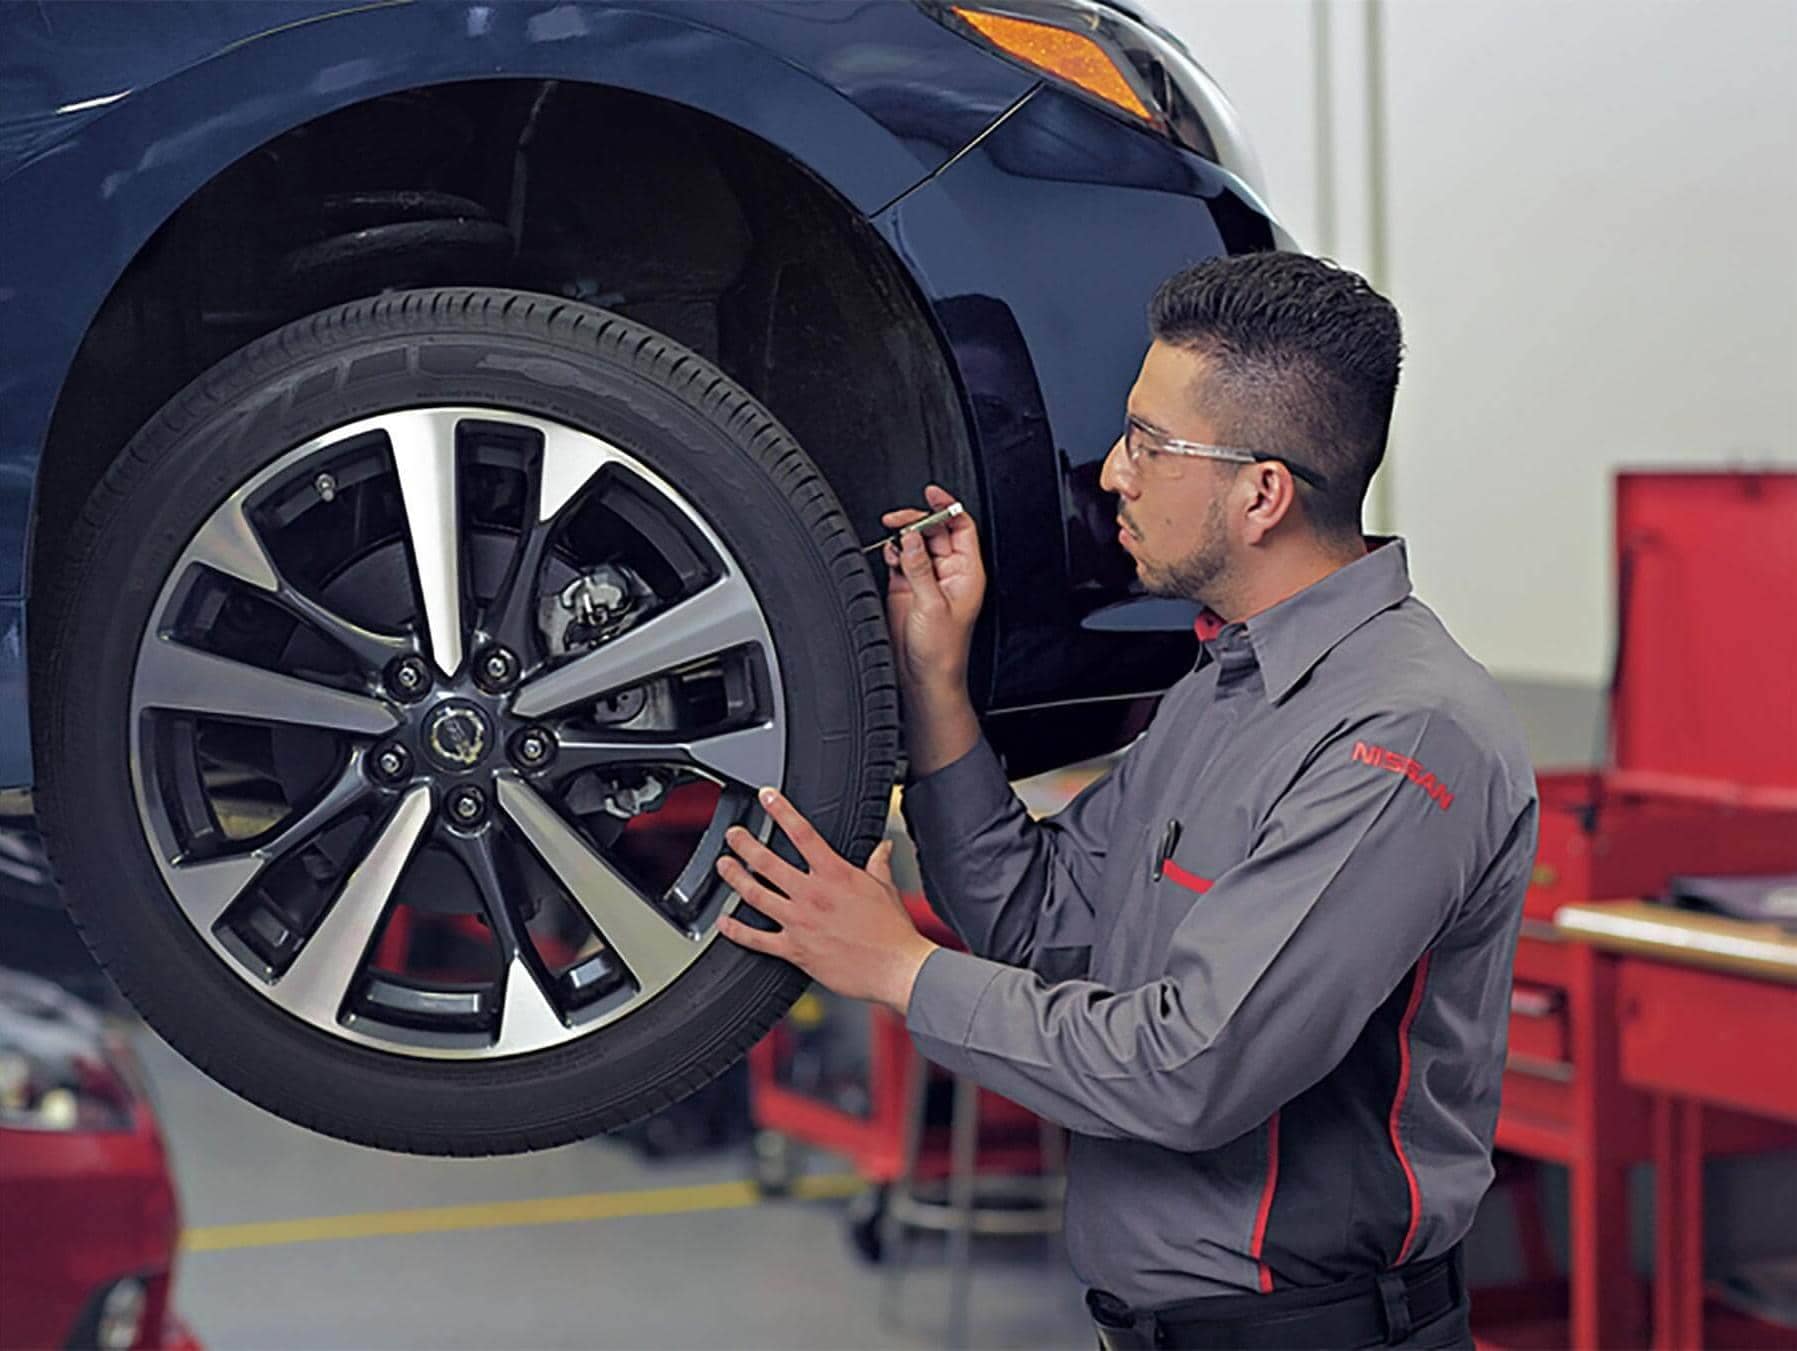 Nissan Service technician testing the tire treads on a vehicle